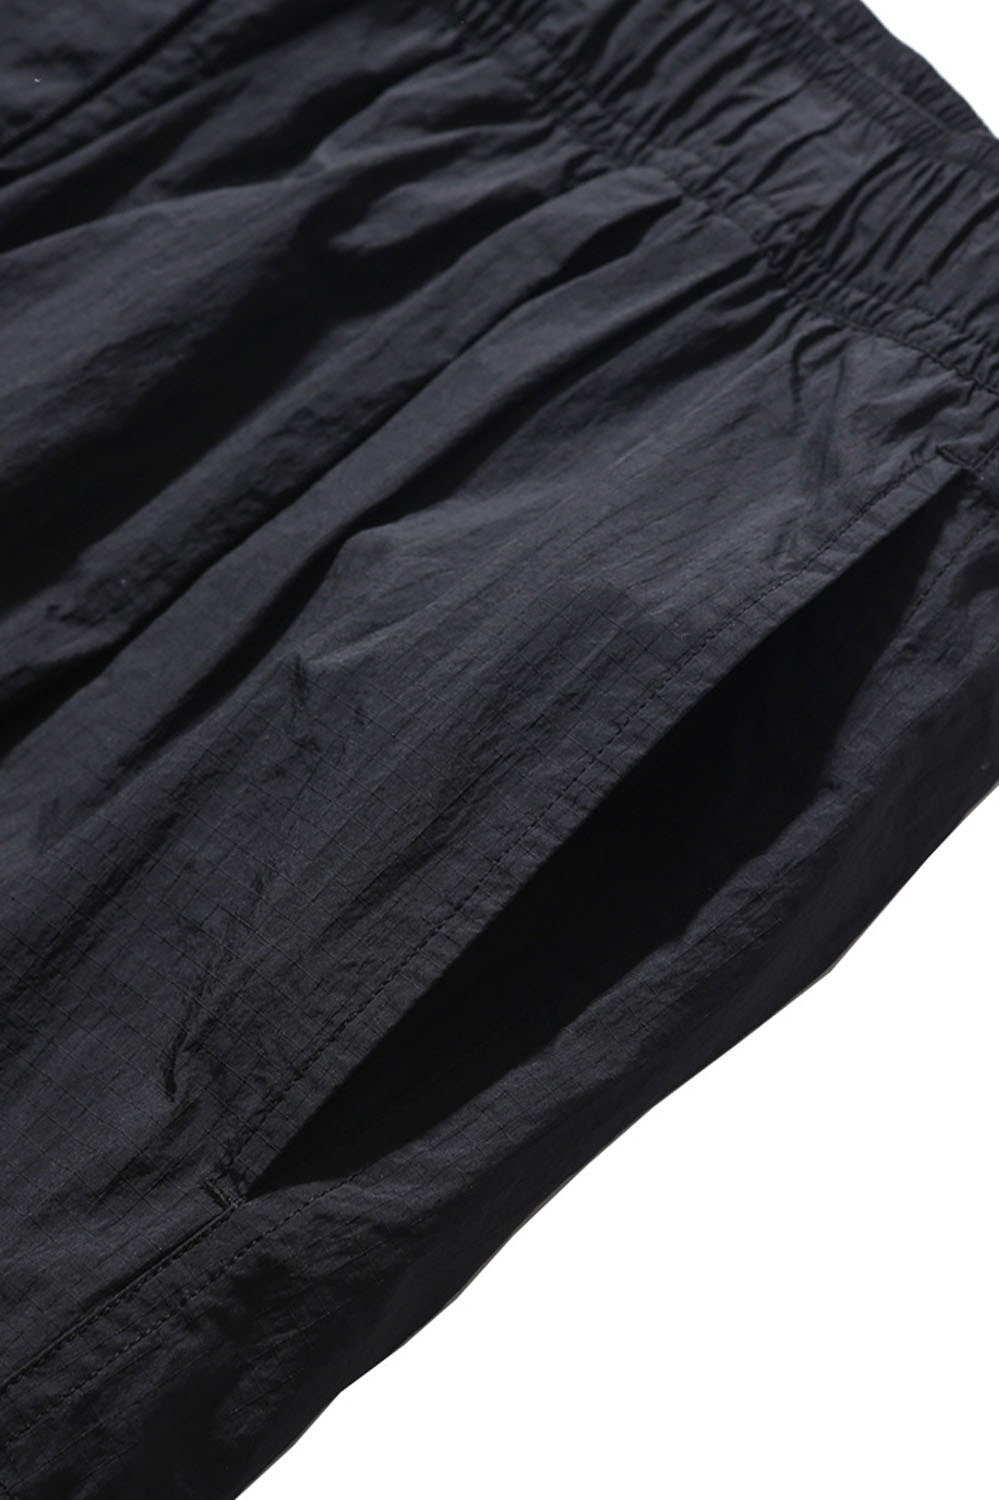 Over Mil 6p Shorts-Black Ripstop